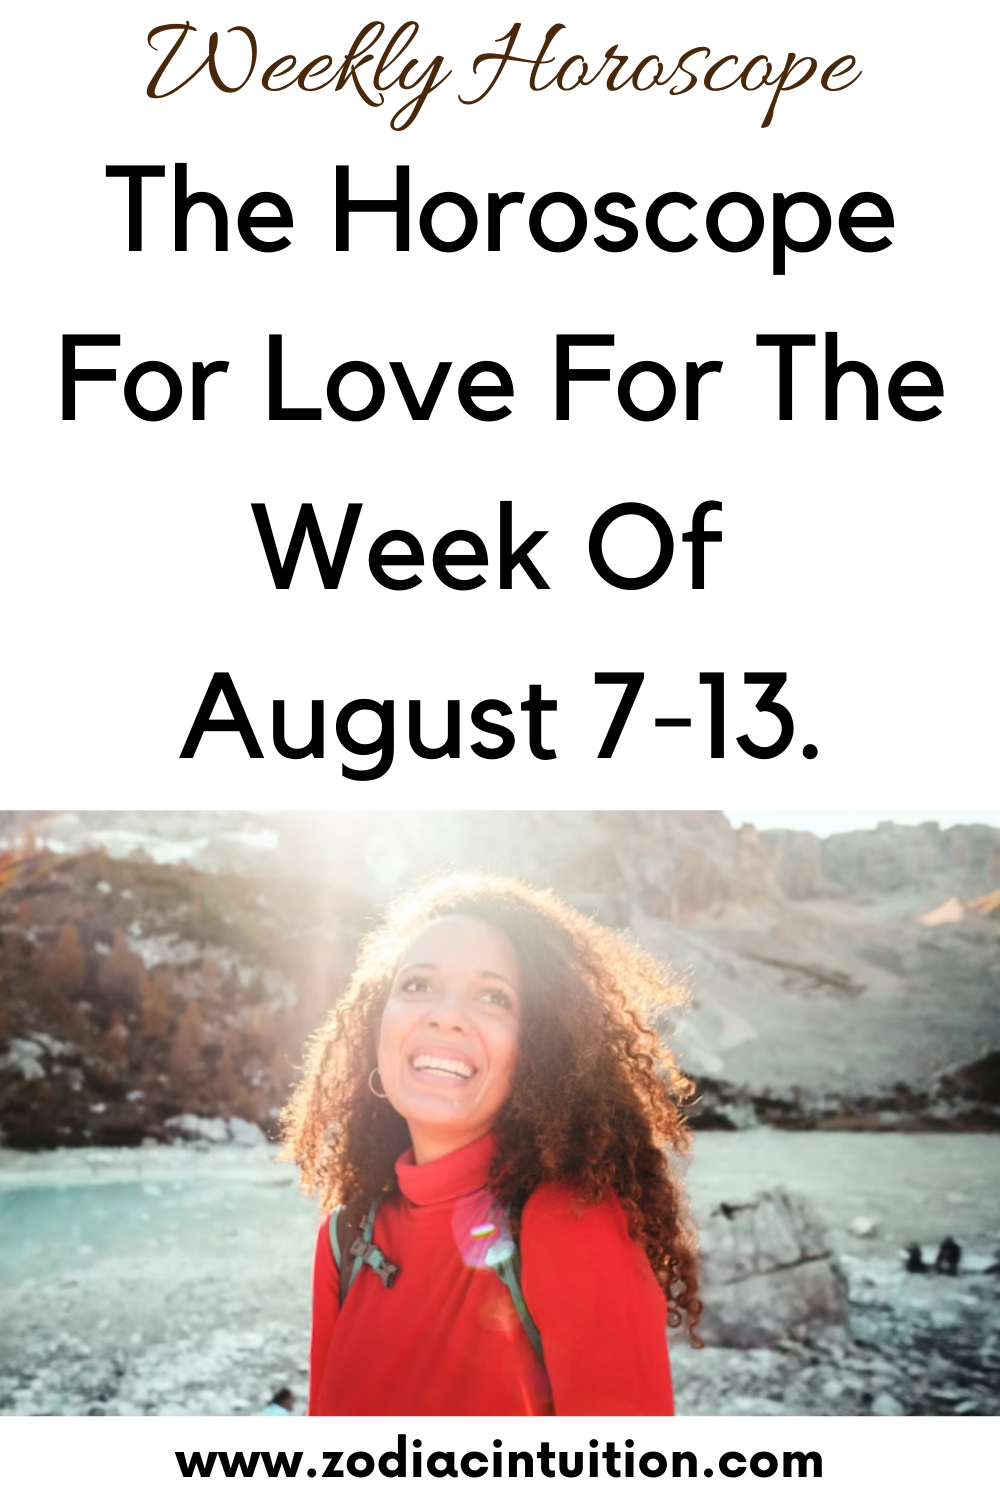 The Horoscope For Love For The Week Of August 7-13.